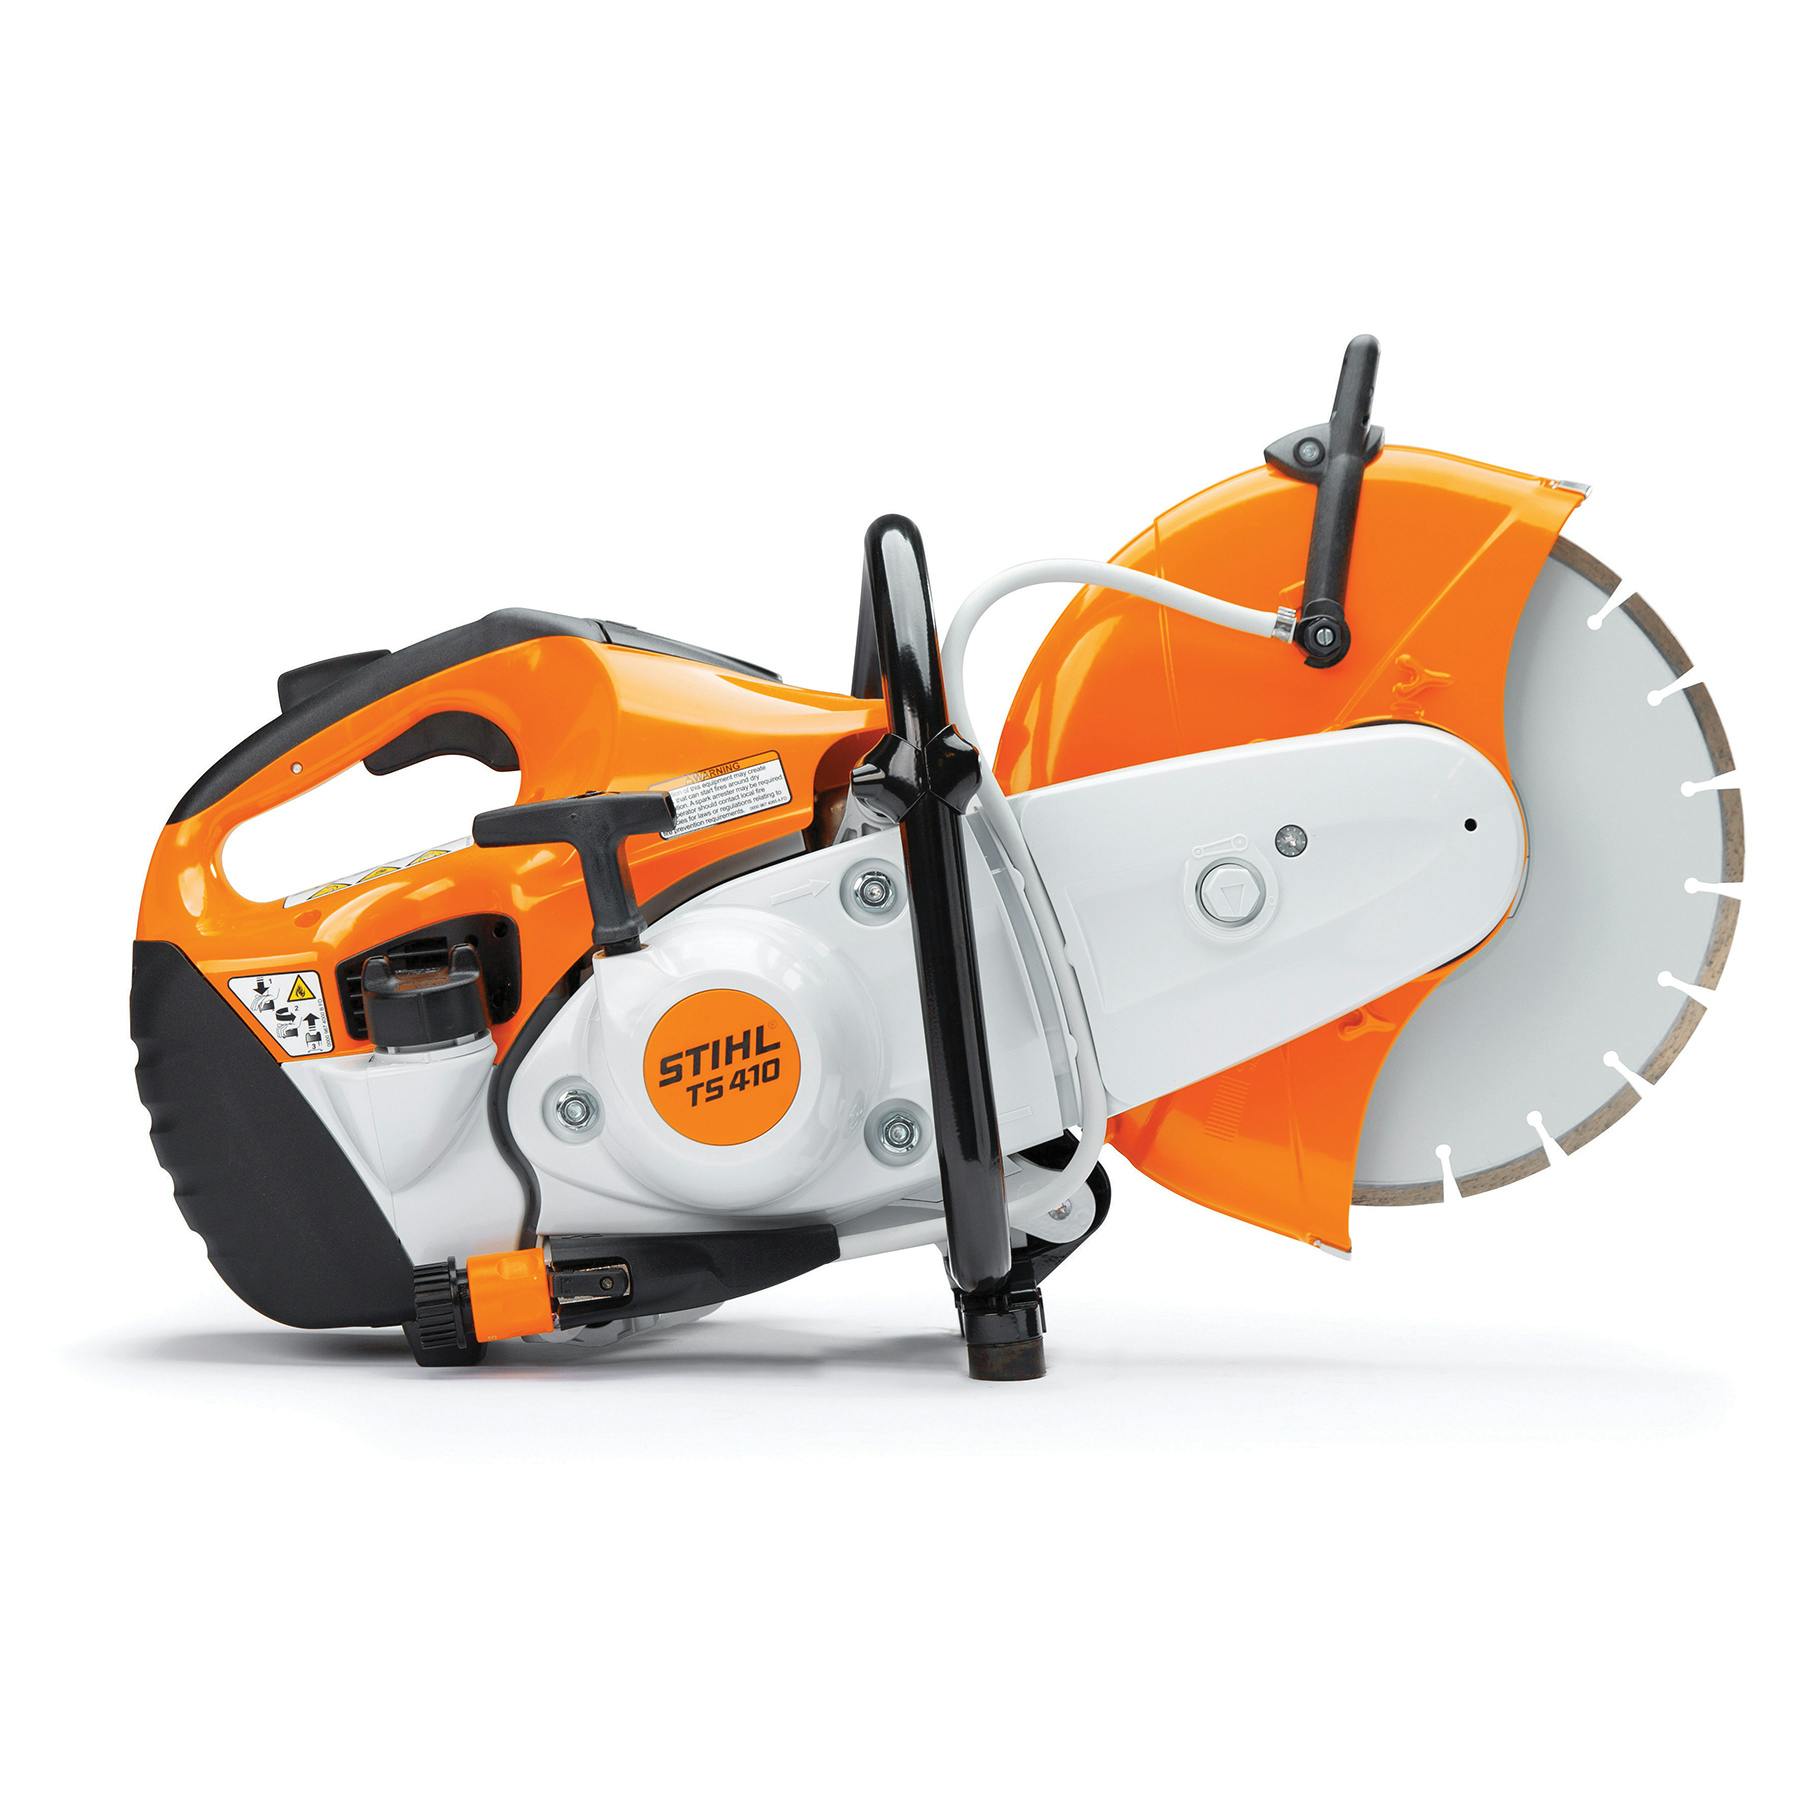 Supplementary Filter 4201 140 1802 STIHL Cut off Saw for sale online 